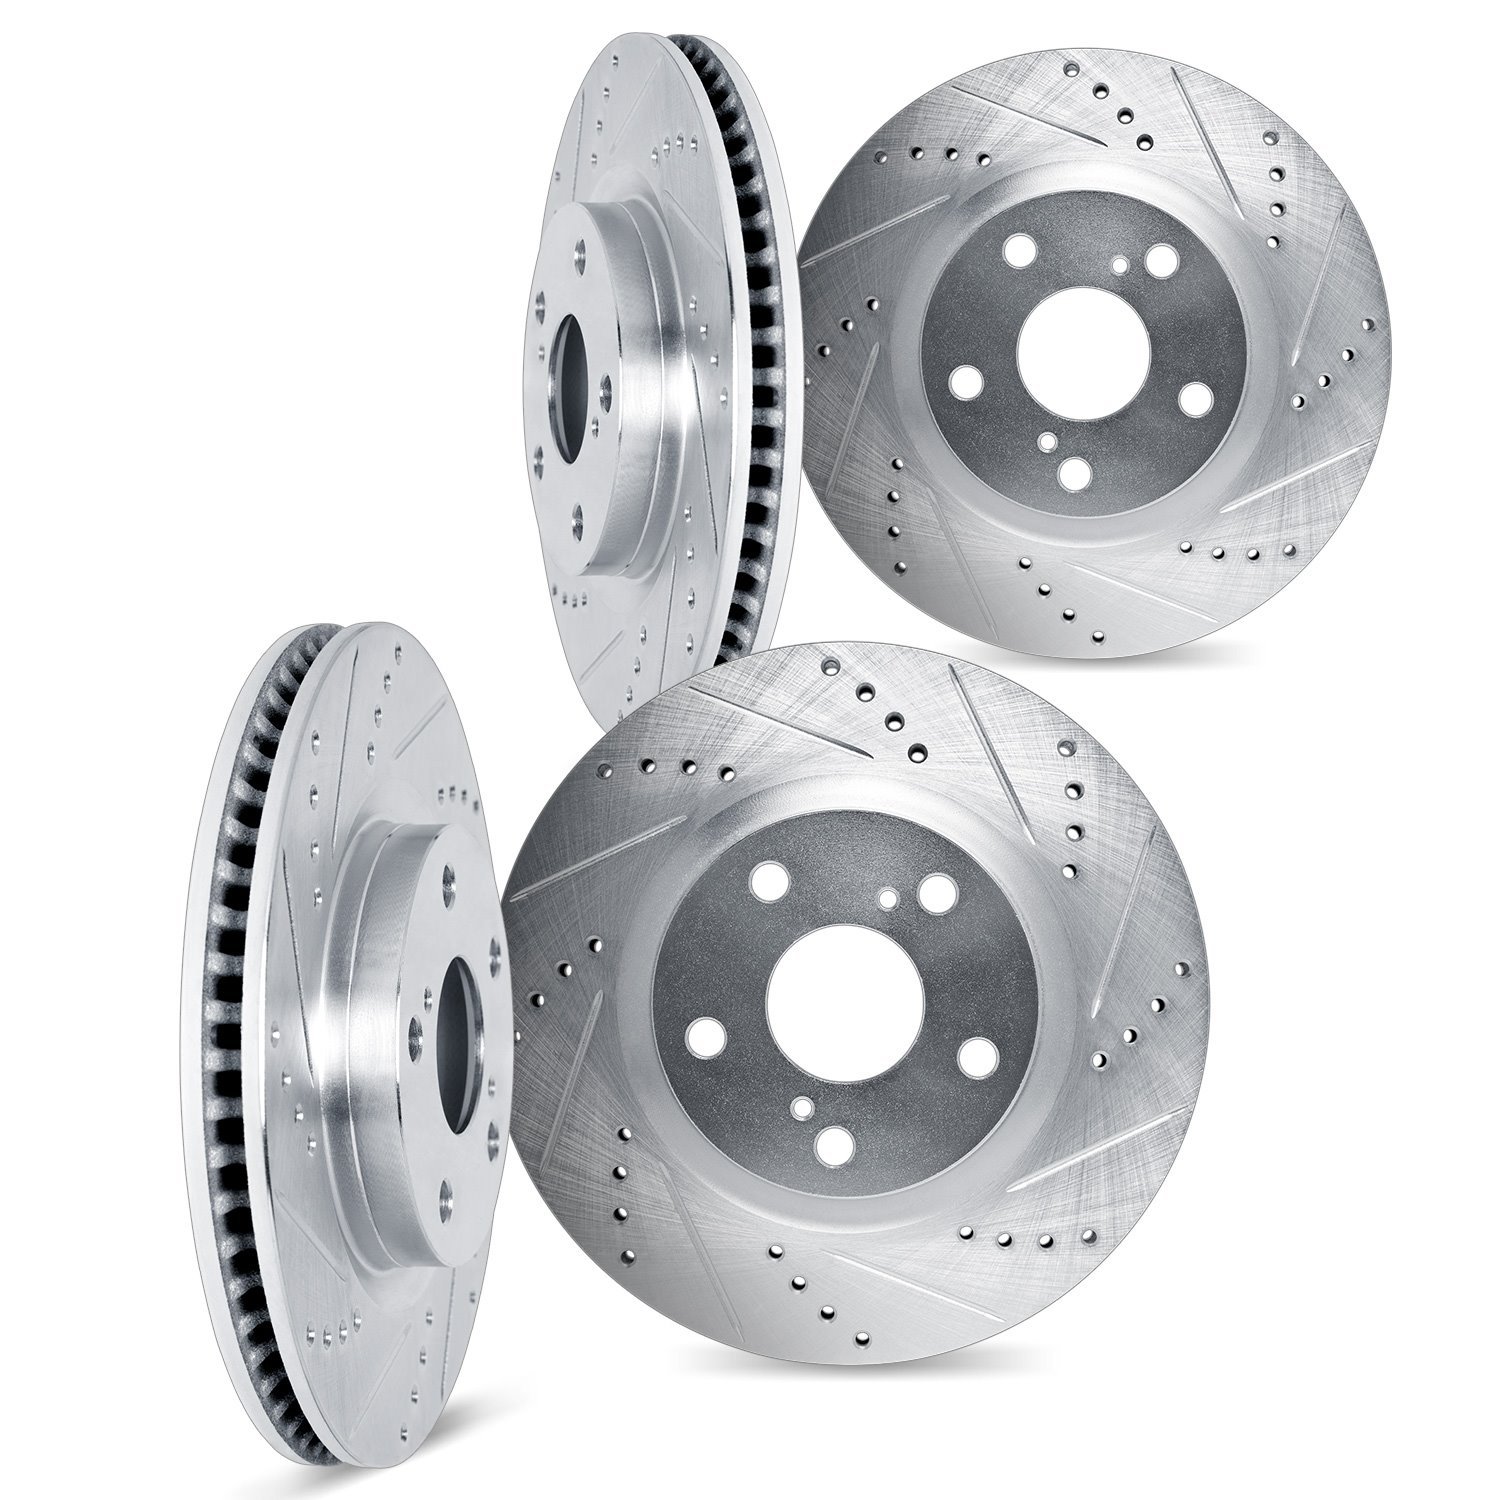 7004-20006 Drilled/Slotted Brake Rotors [Silver], Fits Select Jaguar, Position: Front and Rear